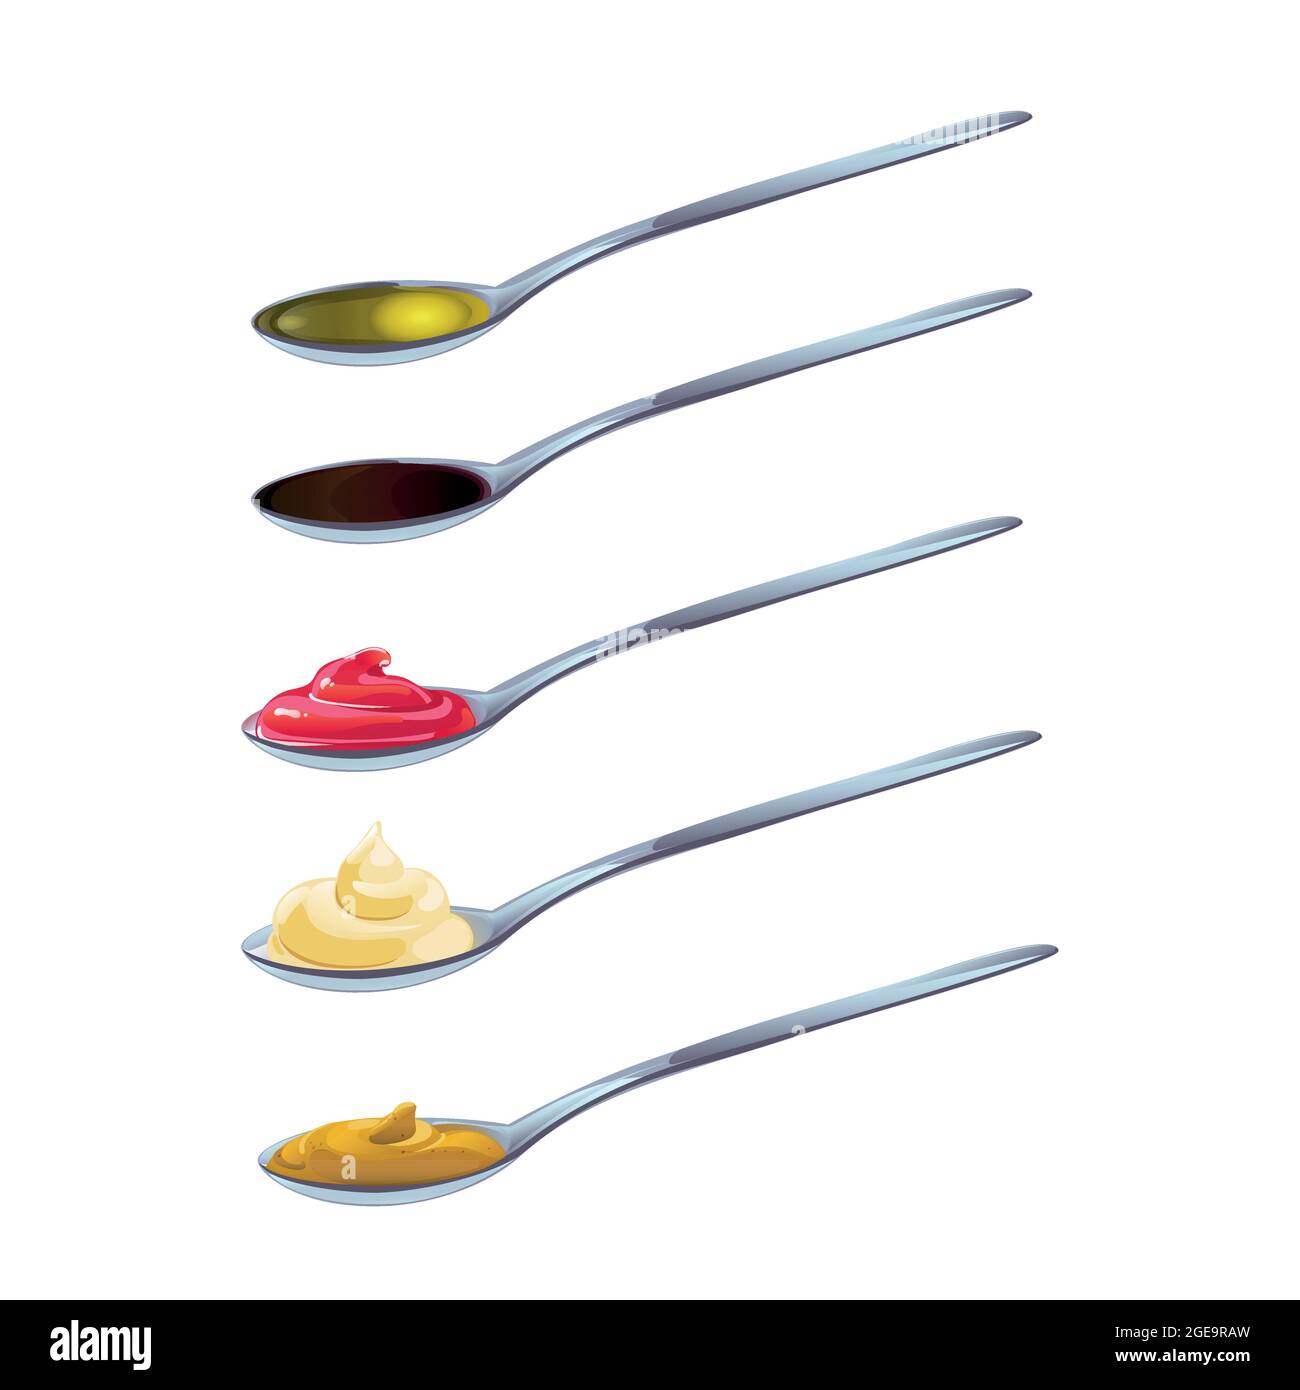 Big sauce in spoons set. Soy, Olive Oil, Mustard, Ketchup and Mayonnaise sauces. Condiment elements for food design. Stock Vector